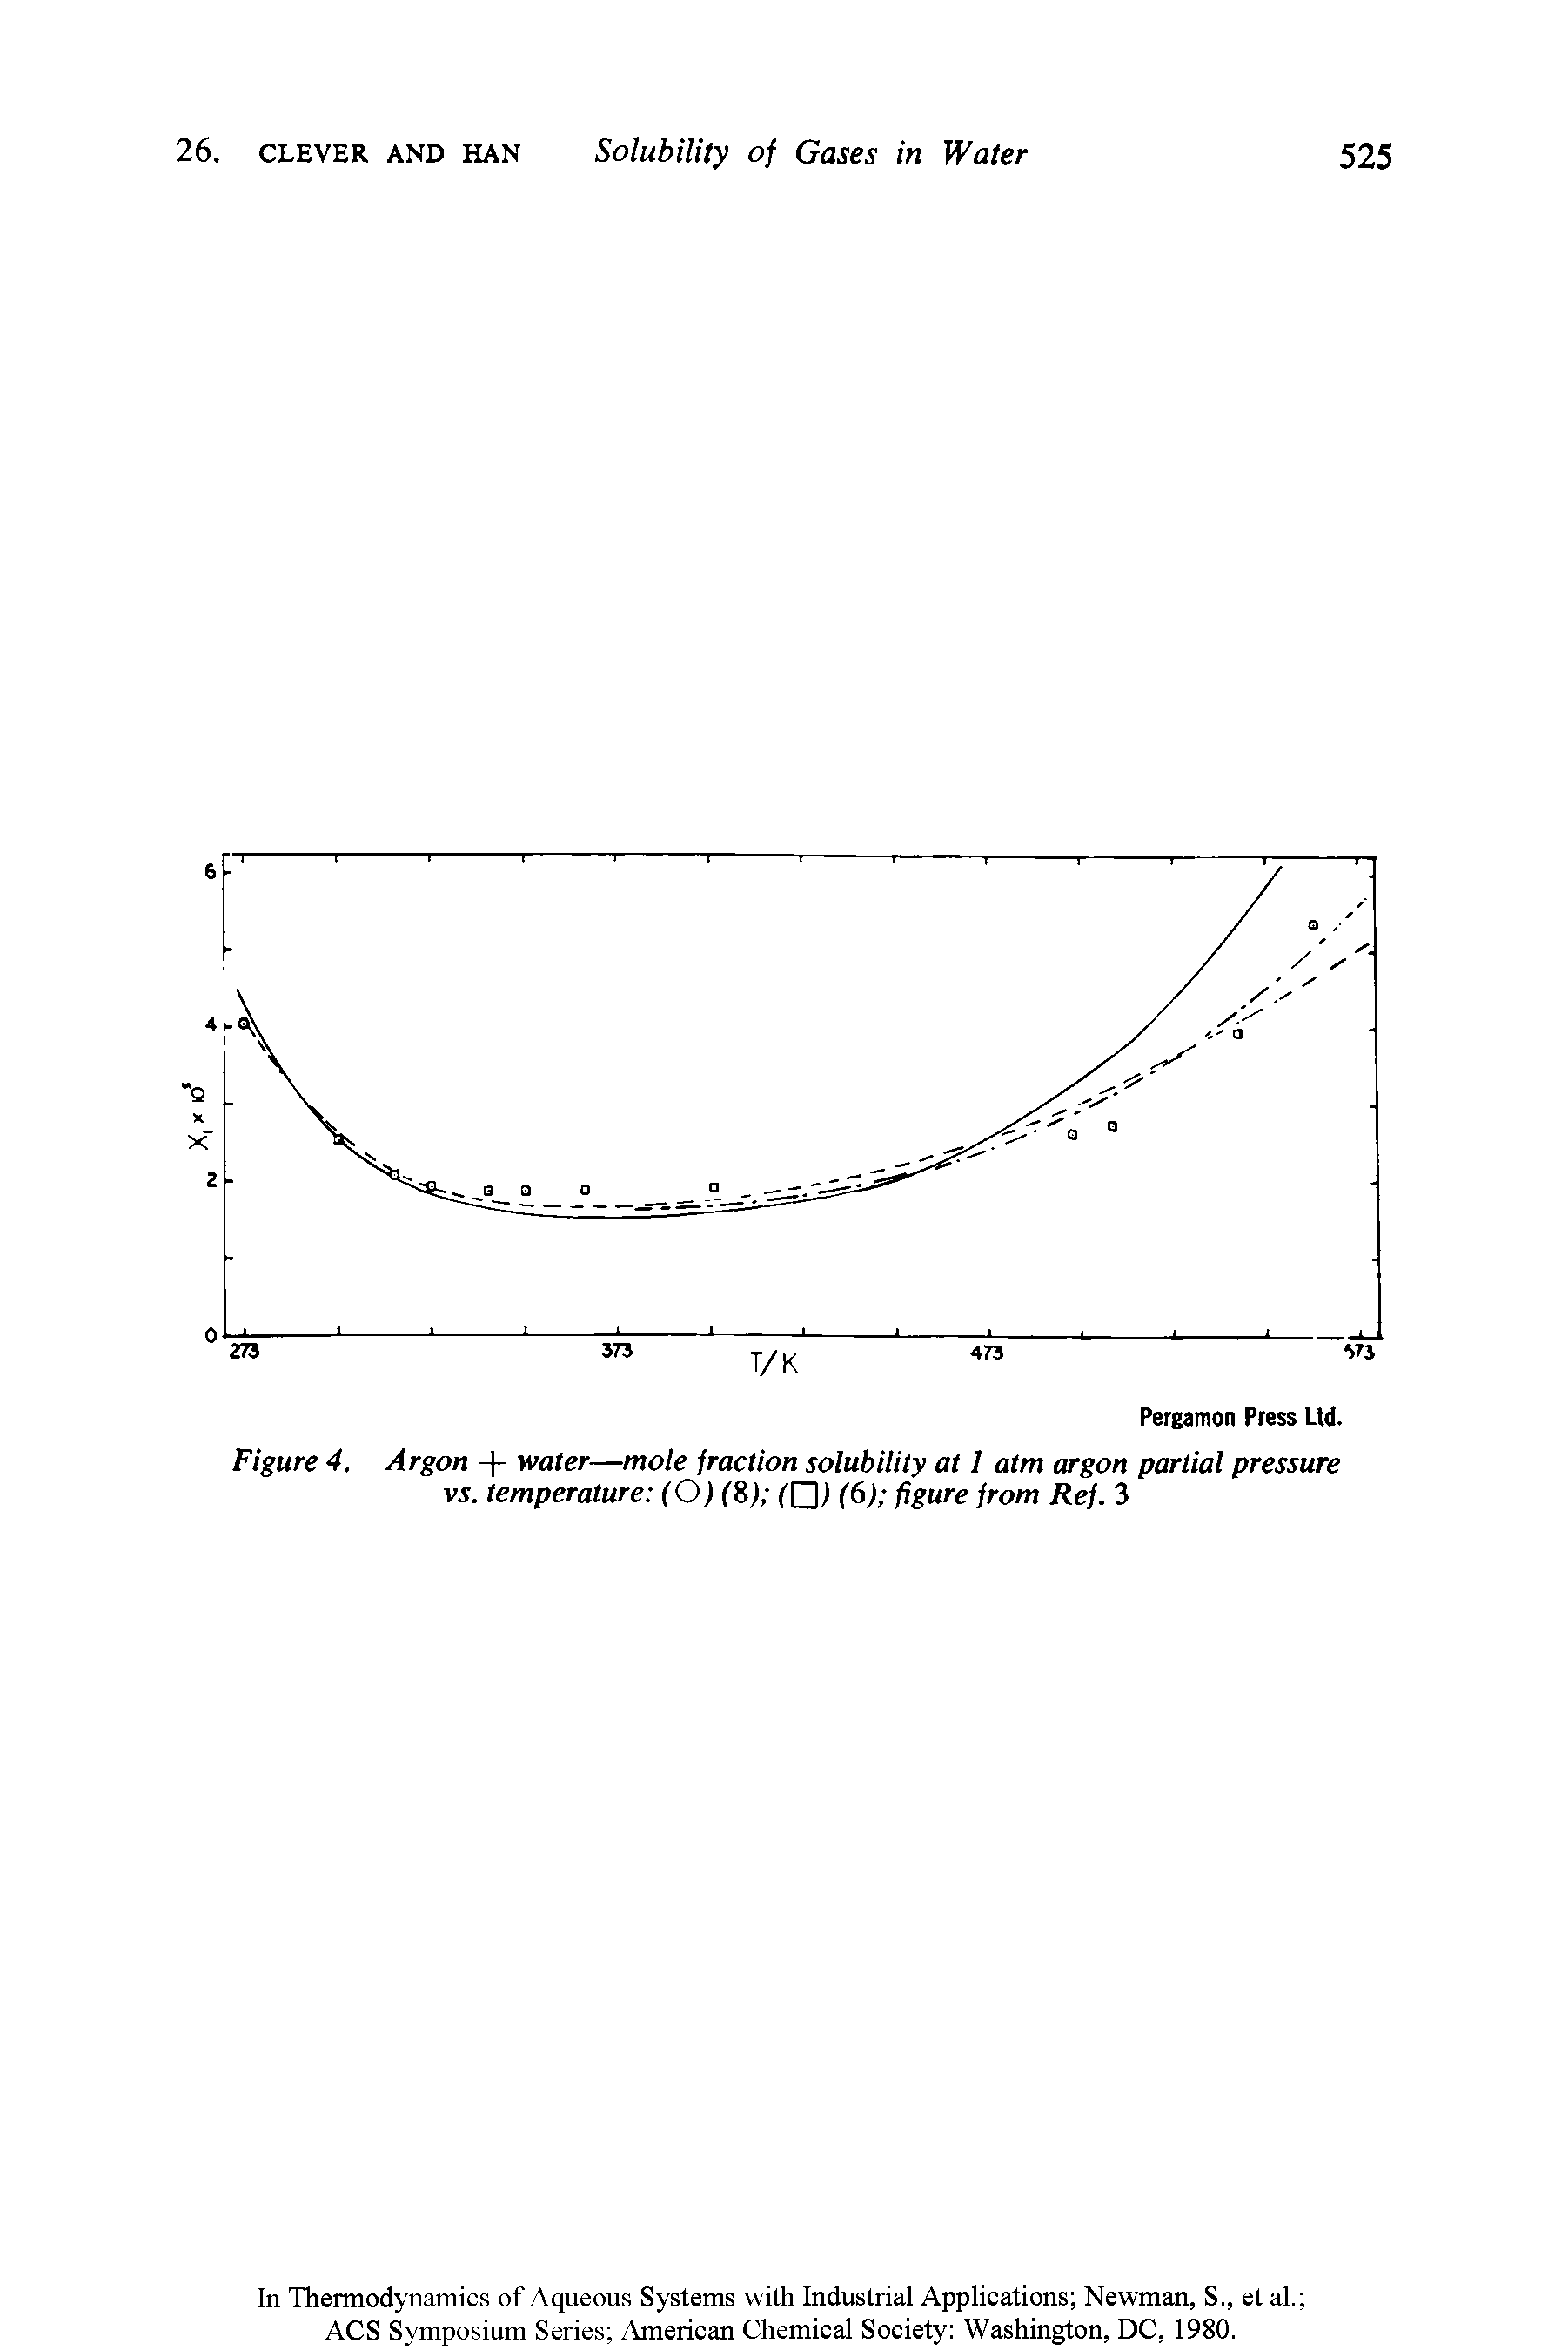 Figure 4. Argon + water—mole fraction solubility at 1 atm argon partial pressure vs. temperature (O) (8) (QJ (6) figure from Ref. 3...